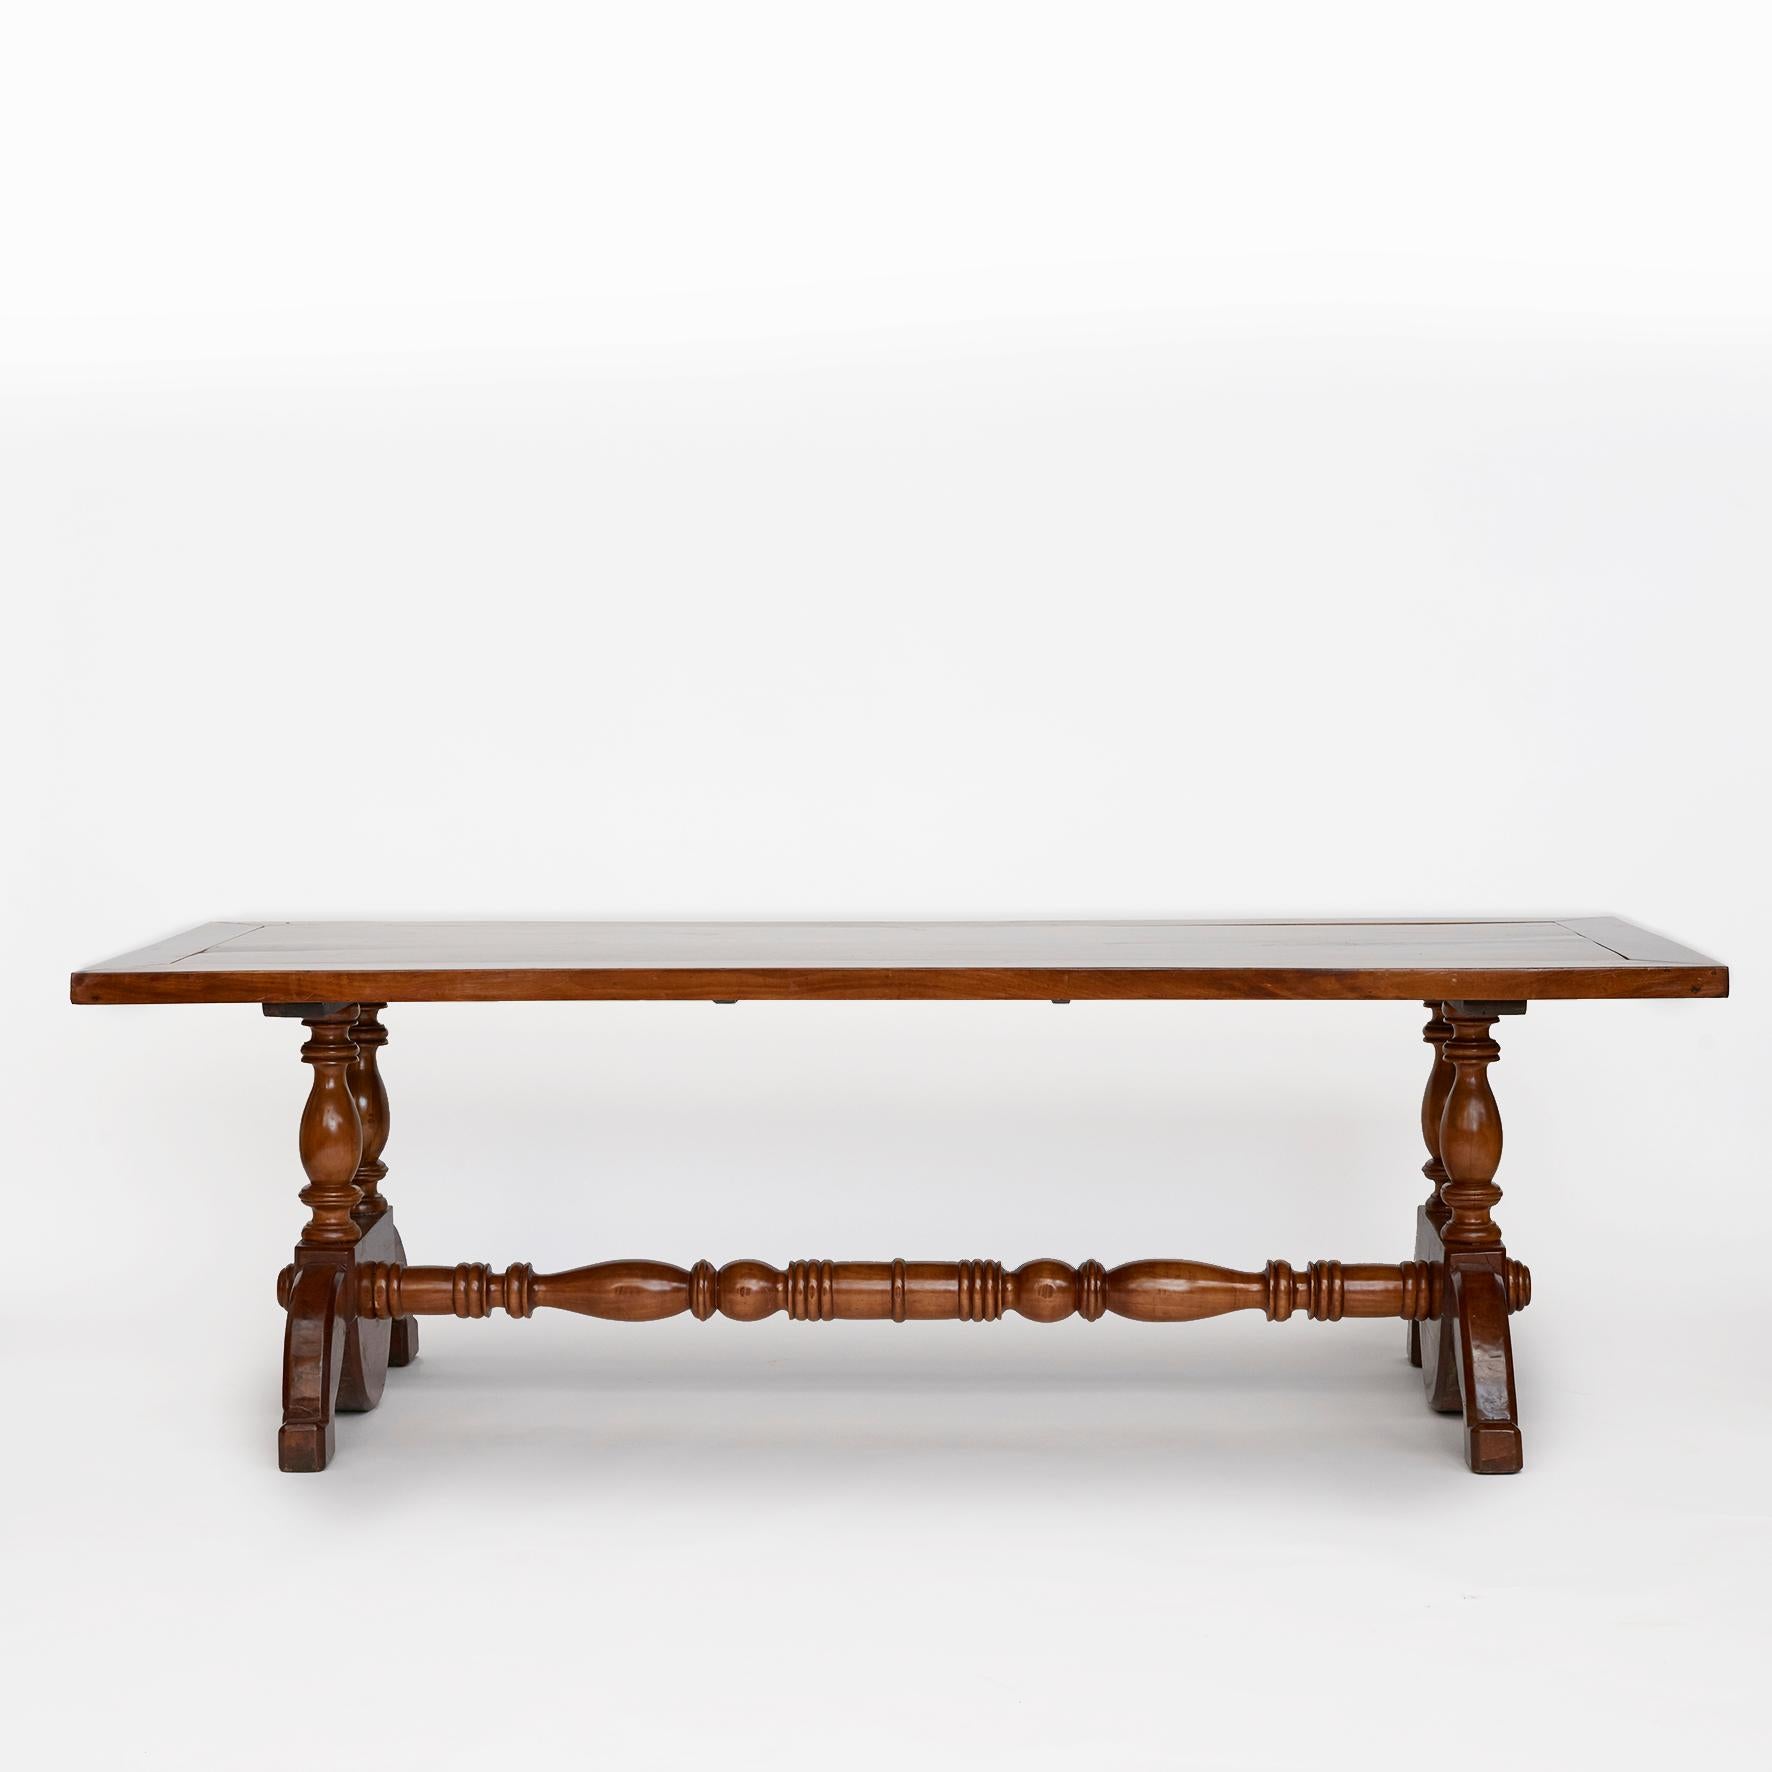 Long dining table (242 cm x 94 cm) made of Molave hardwood.
Rectangular one-piece board top with 